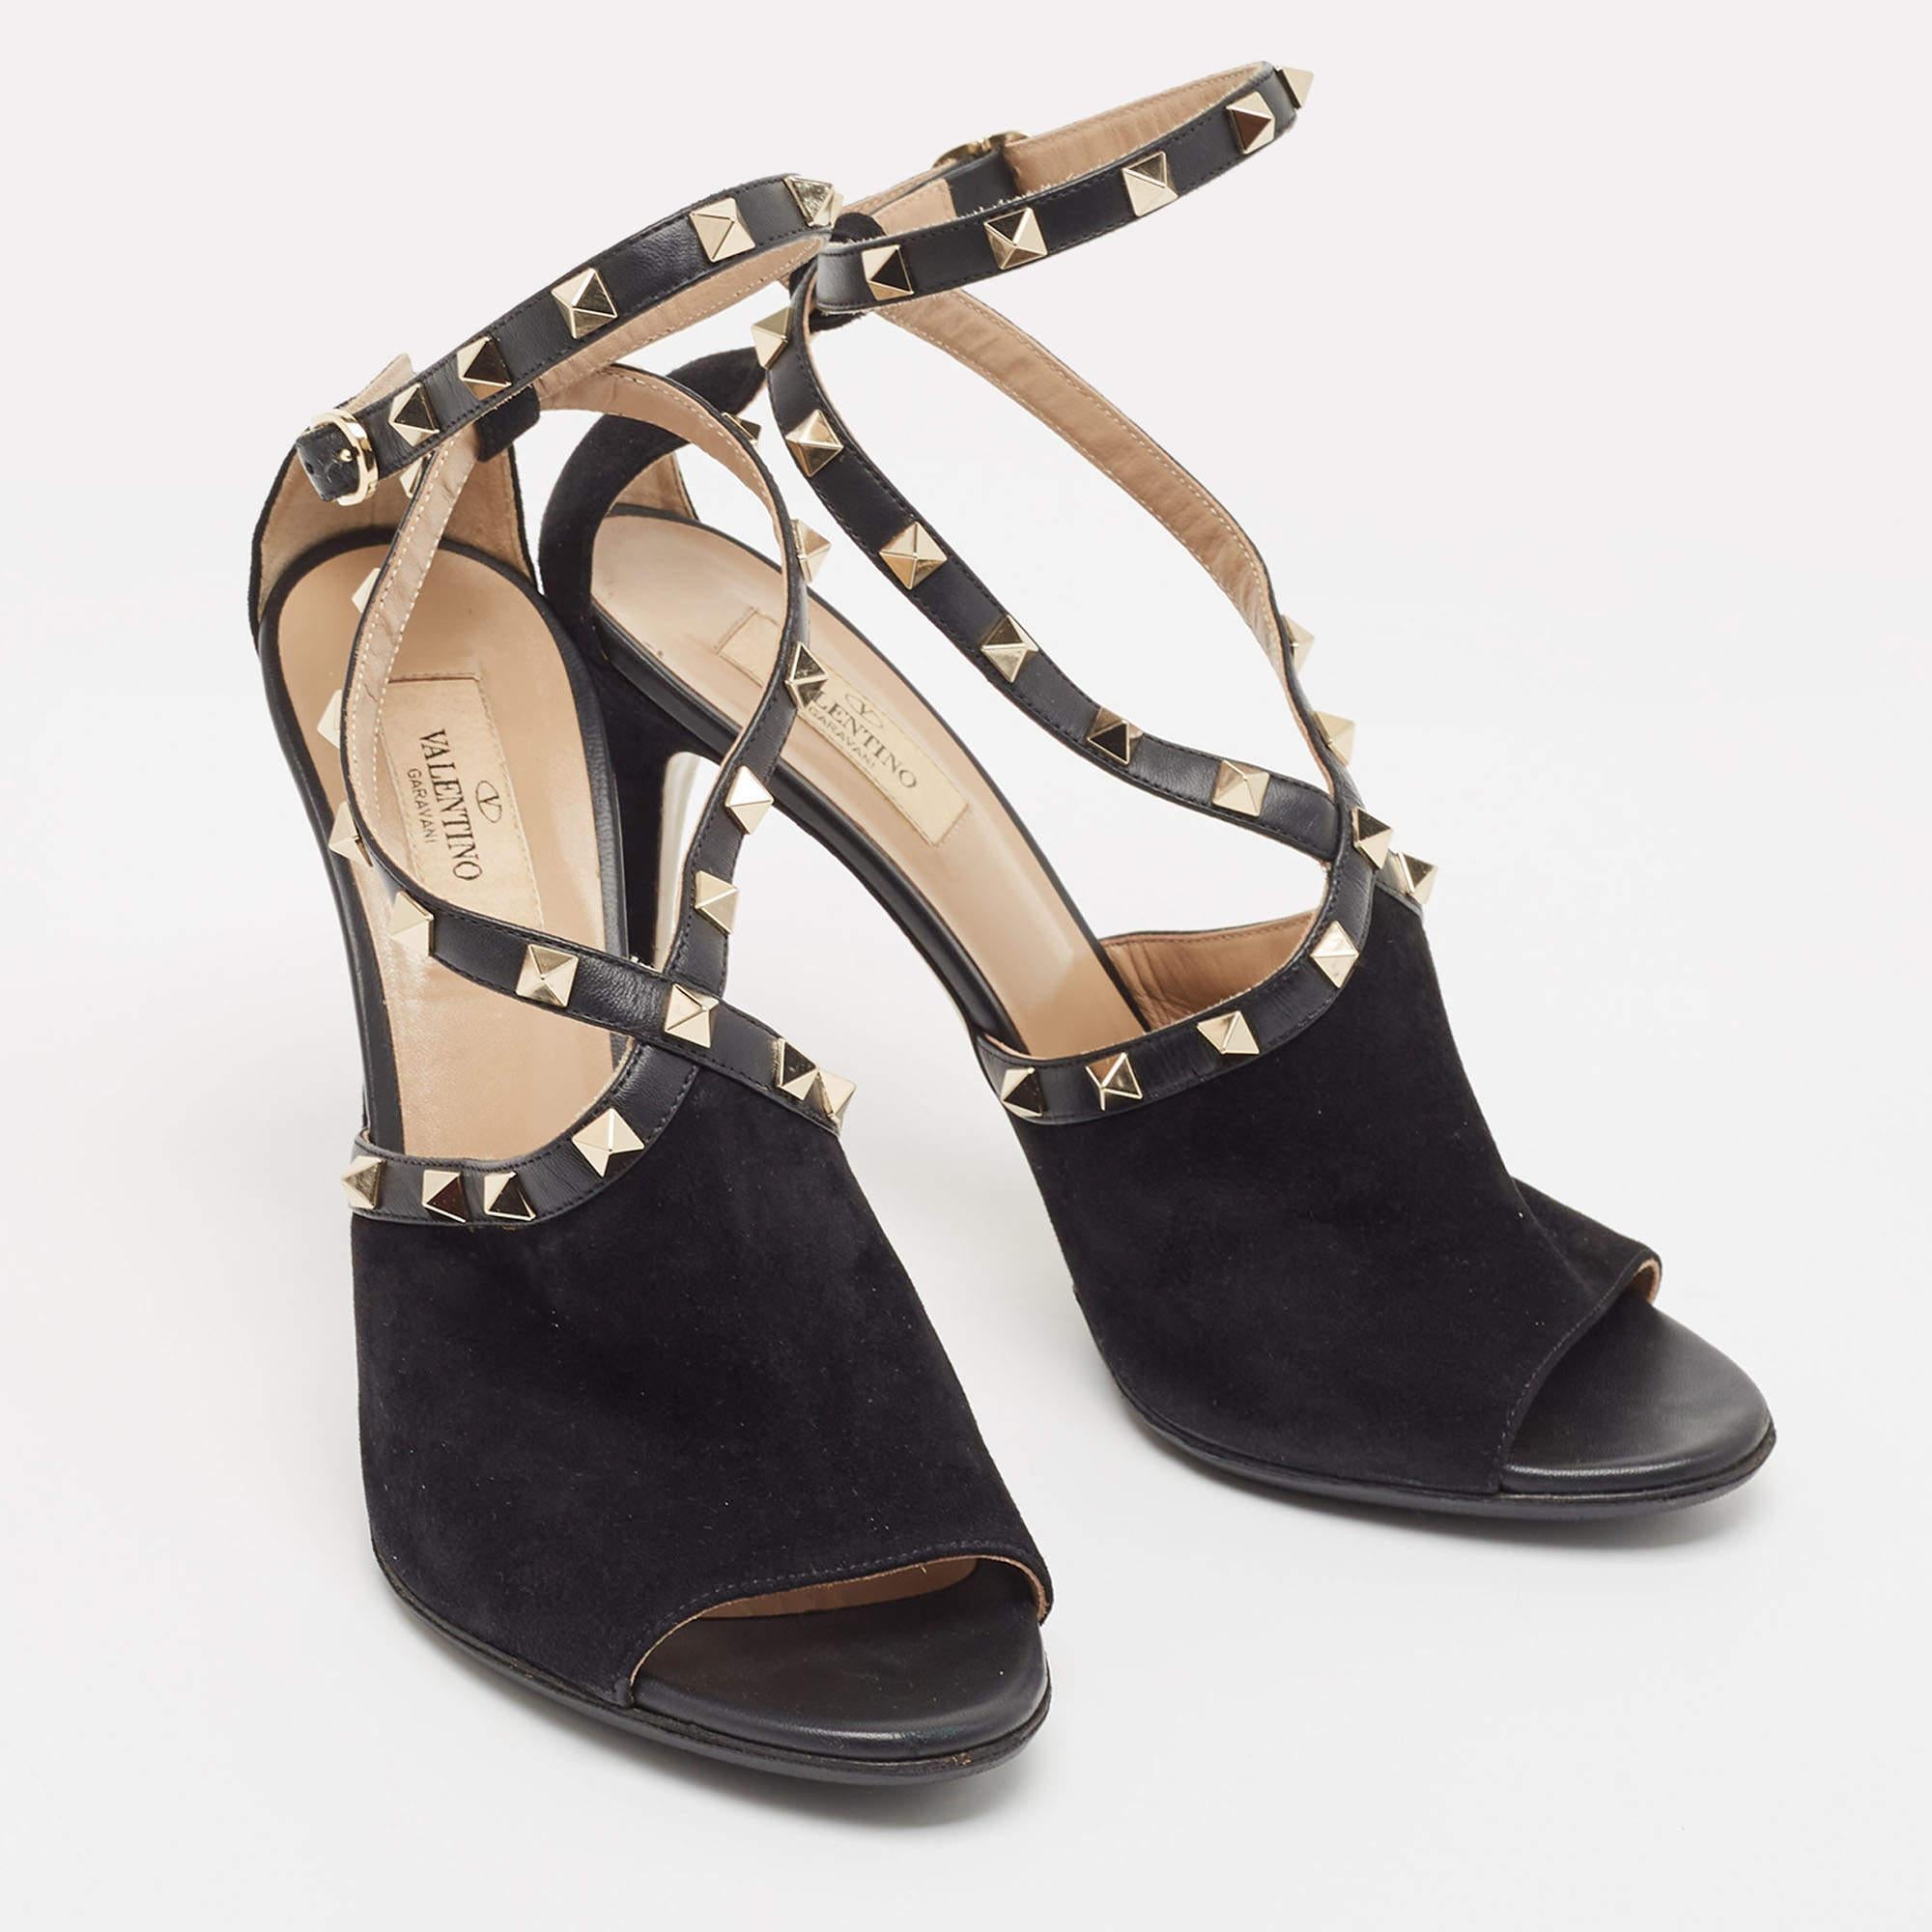 Valentino Black Suede and Leather Rockstud Ankle Strap Sandals Size 40 In Good Condition For Sale In Dubai, Al Qouz 2